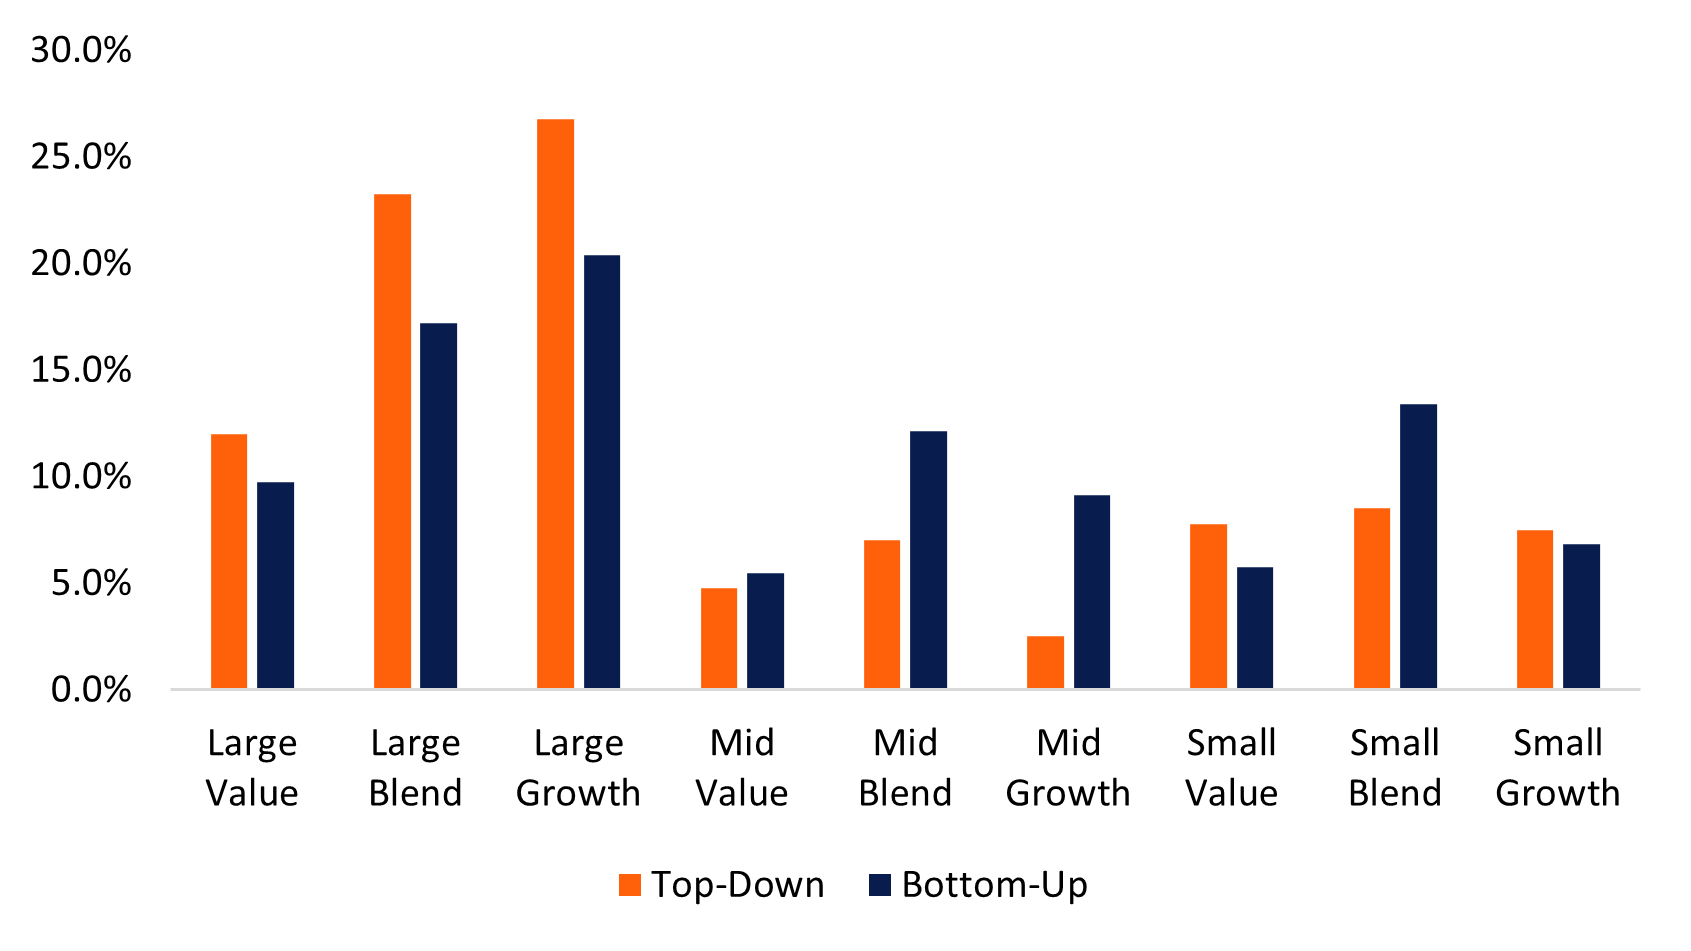 Bar graph depicting the difference between a top-down and bottom-up analysis on the domestic portion of a hypothetical equity/mutual fund portfolio